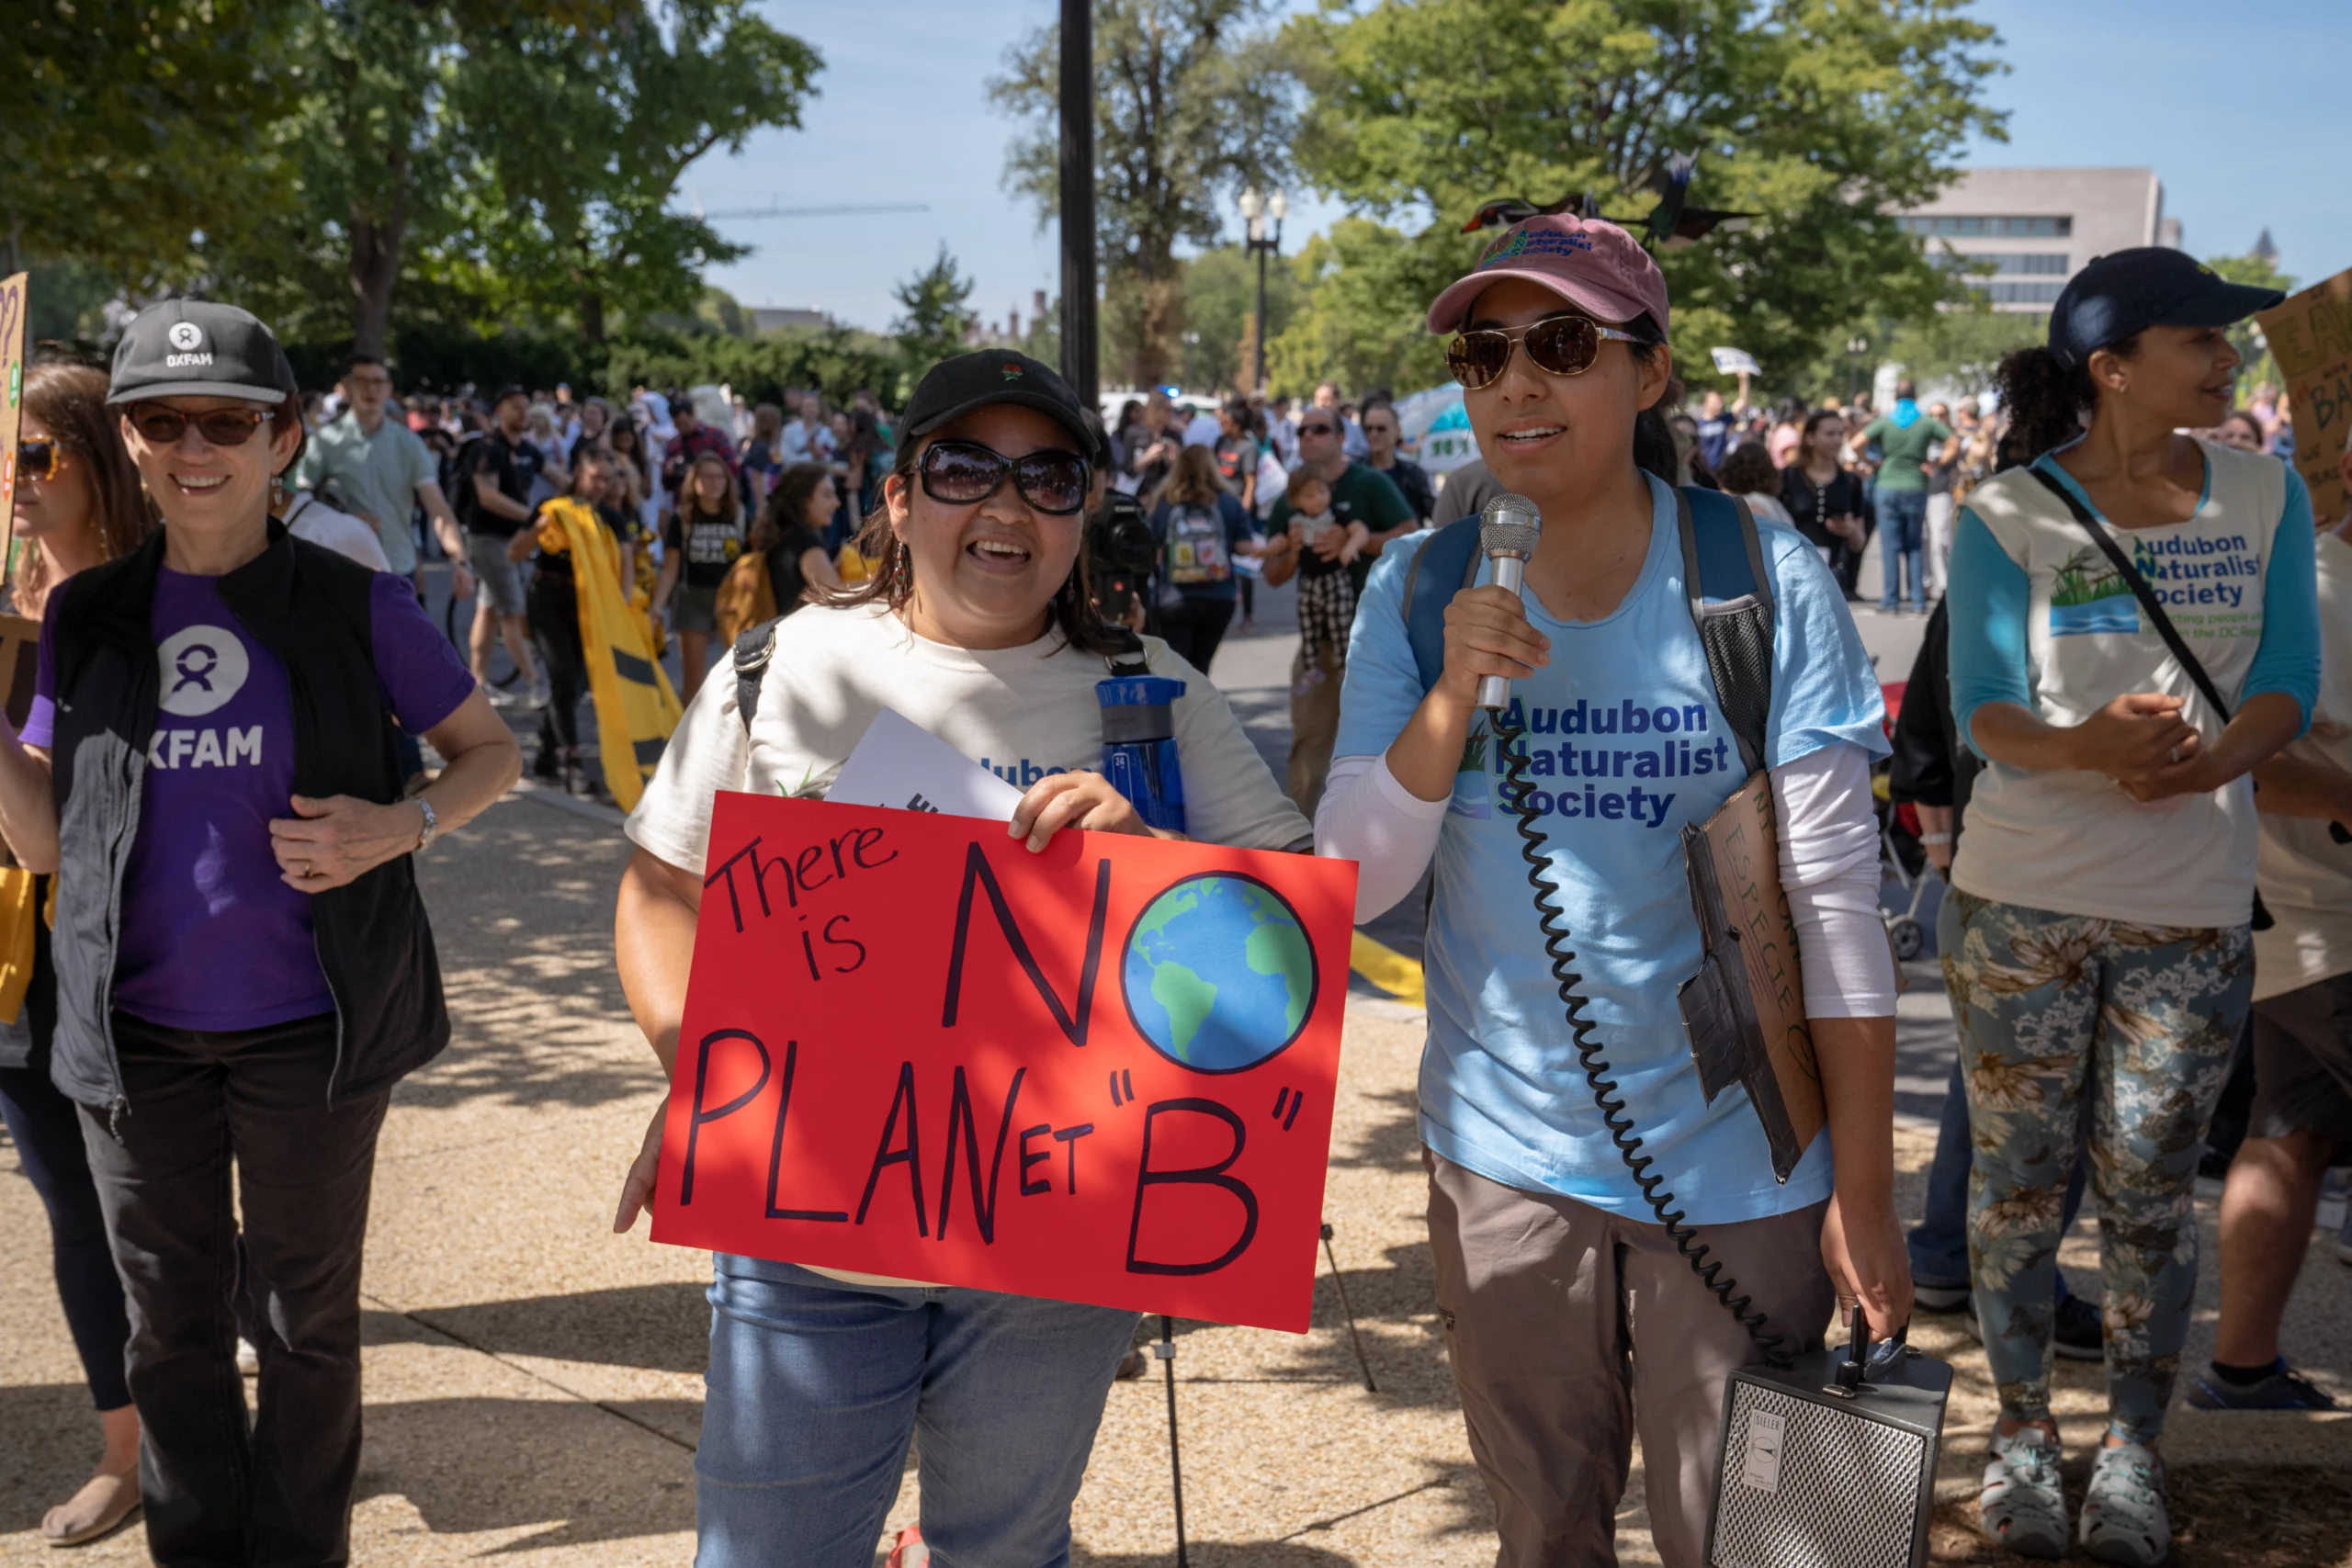 Two Latina women stand in the midst of a crowd at a march on an autumn day in Washington, DC. On the left, one holds a sign saying "There is No Planet B". On the right, the other holds a megaphone to rally the crowd.